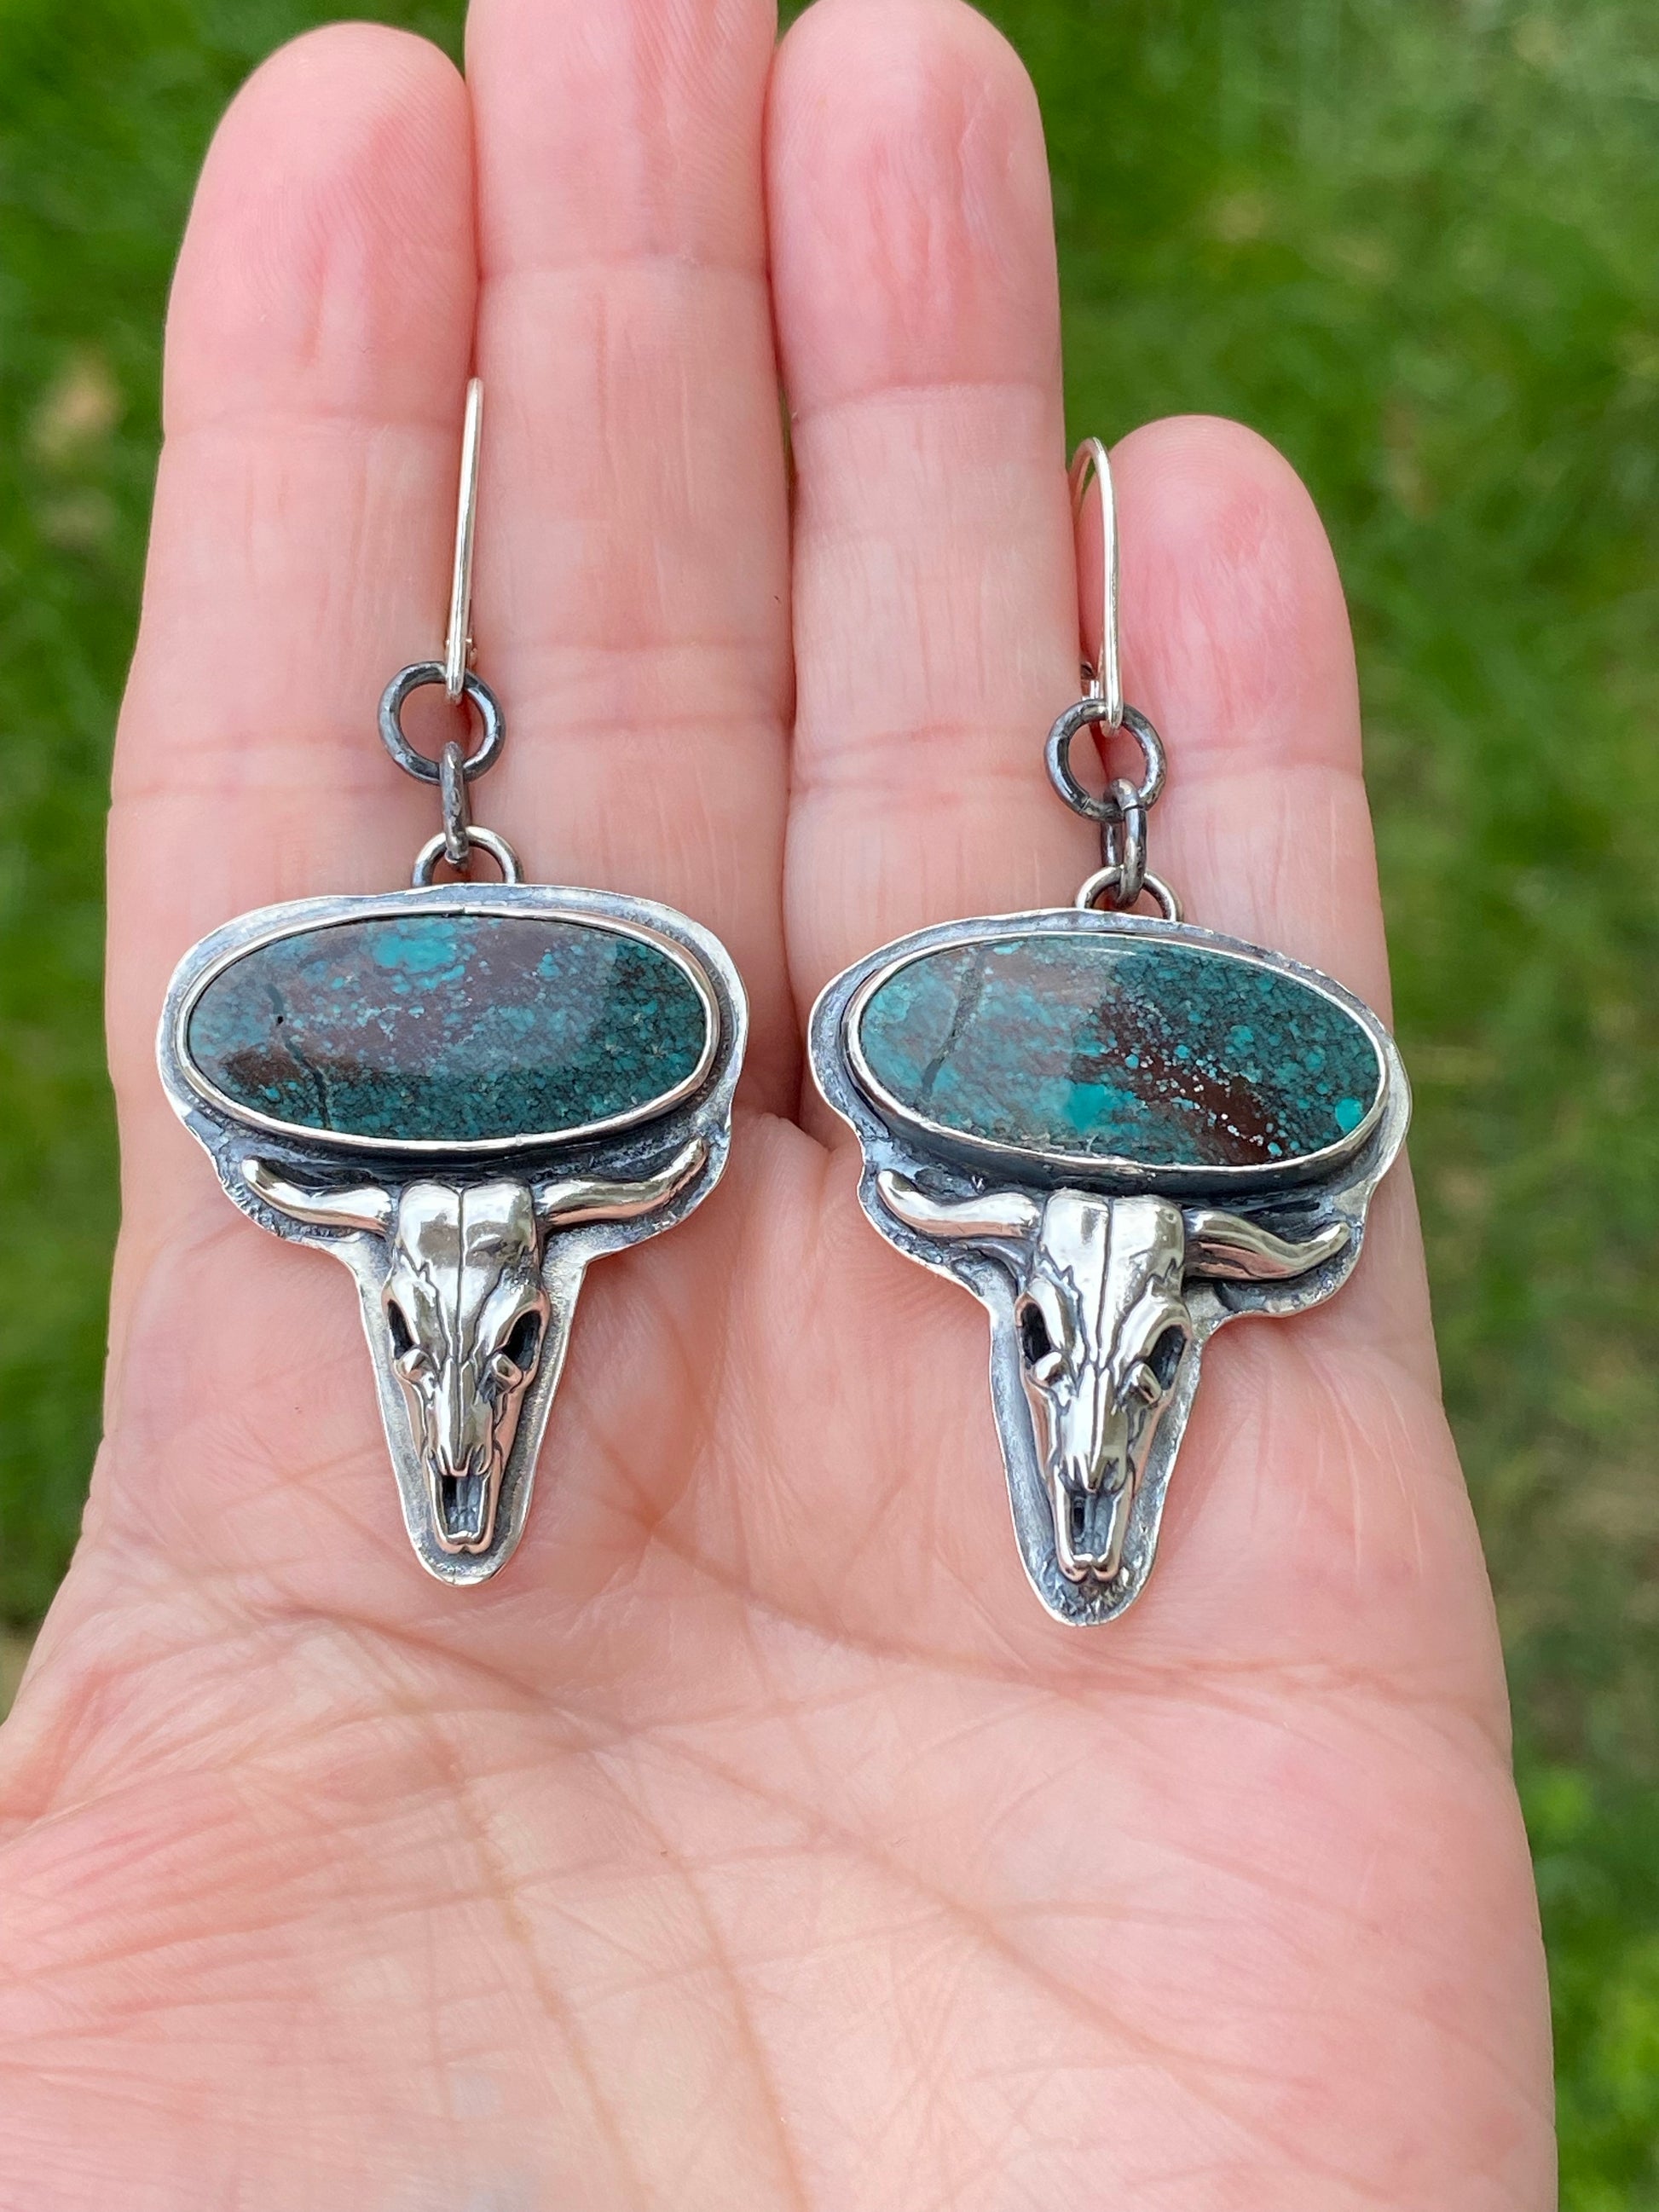 Turquoise steer earrings - collectionsbytracy.com